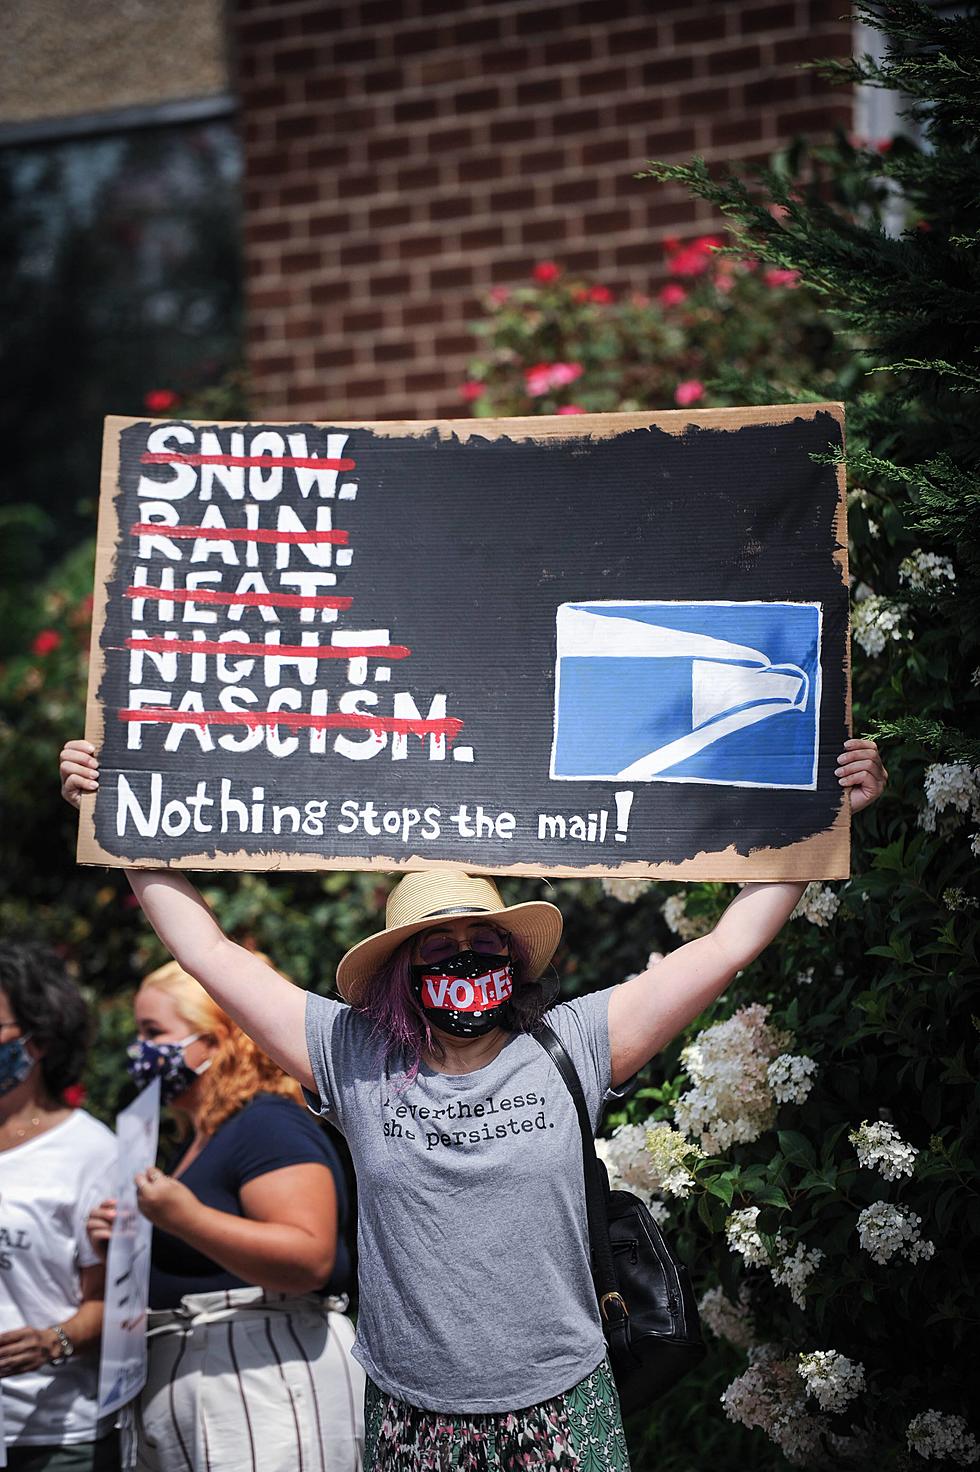 Concerned with elections, mail service overall, Montclair protests at post office